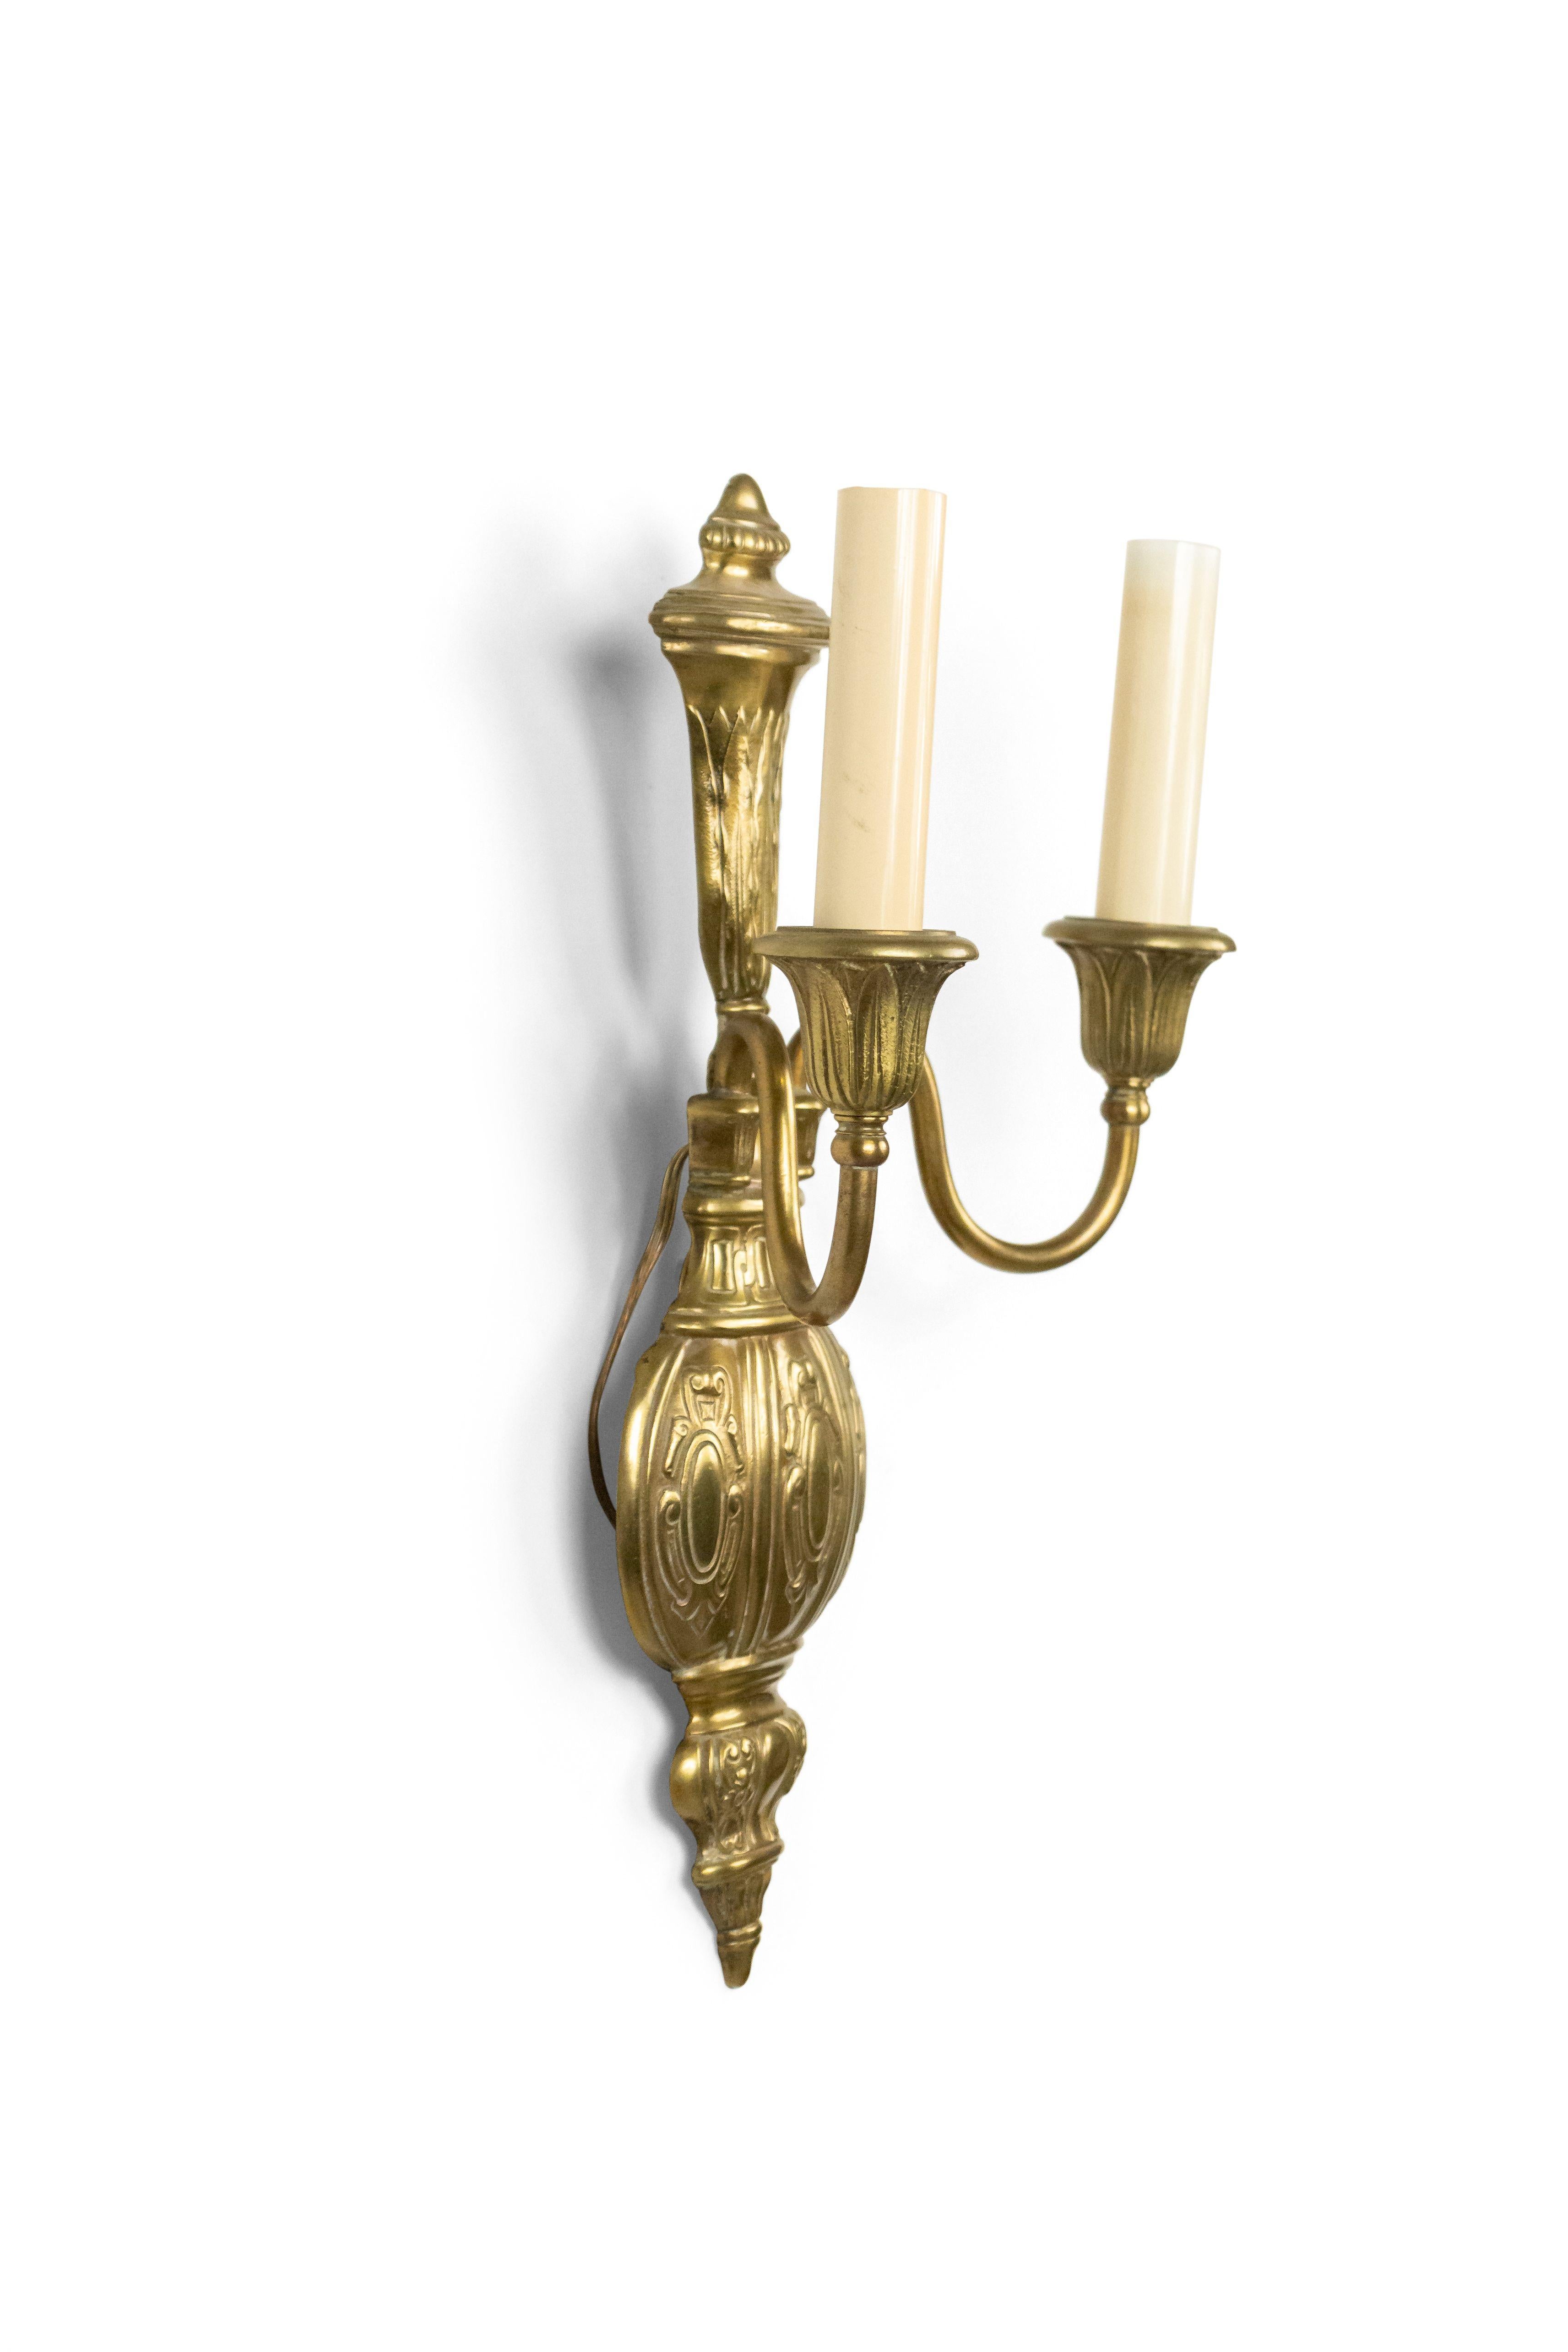 English Georgian-style (20th Century) brass wall sconce with two arms and leaf cast vasiform back plate.
 